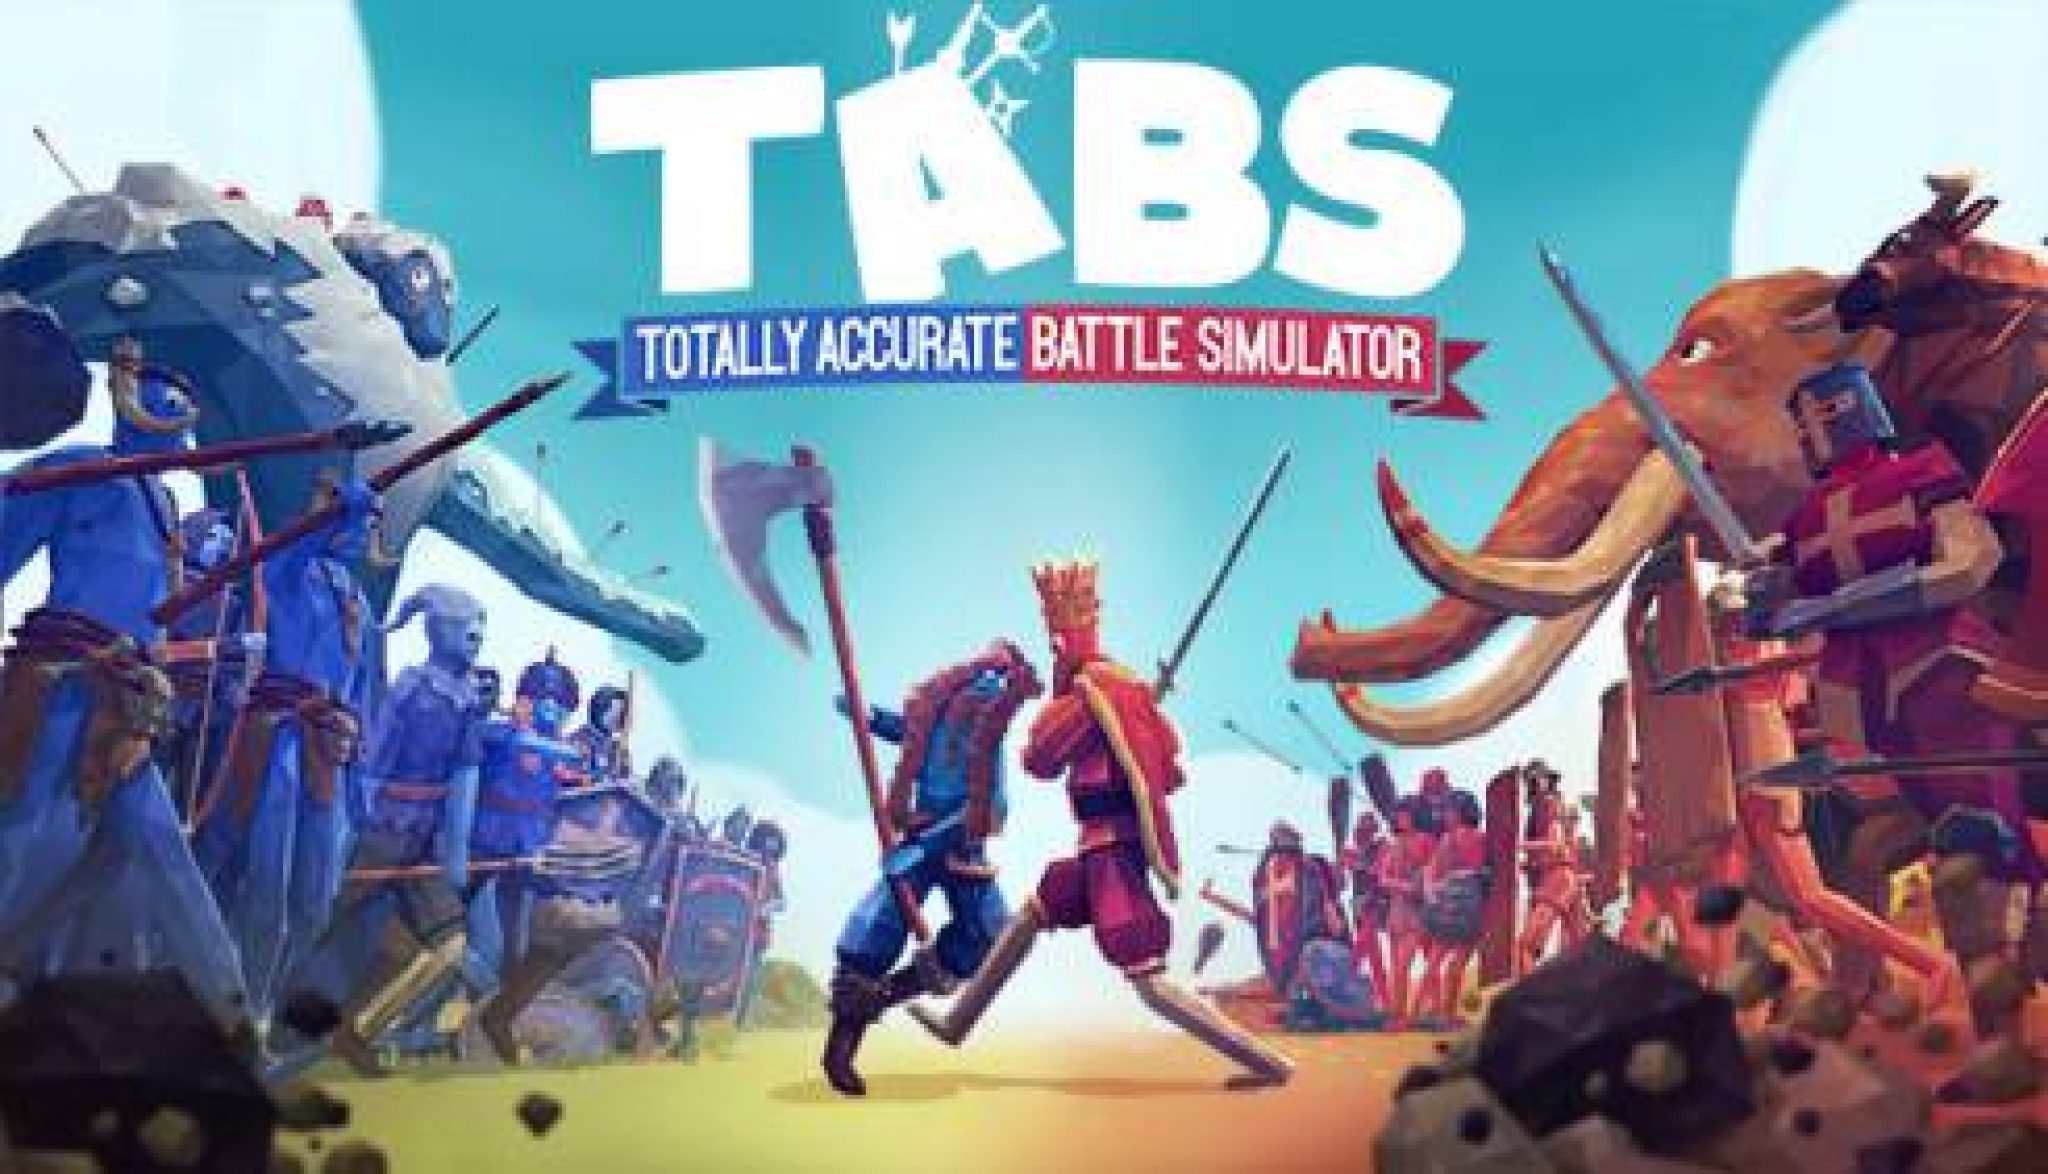 play totally accurate battle simulator for free